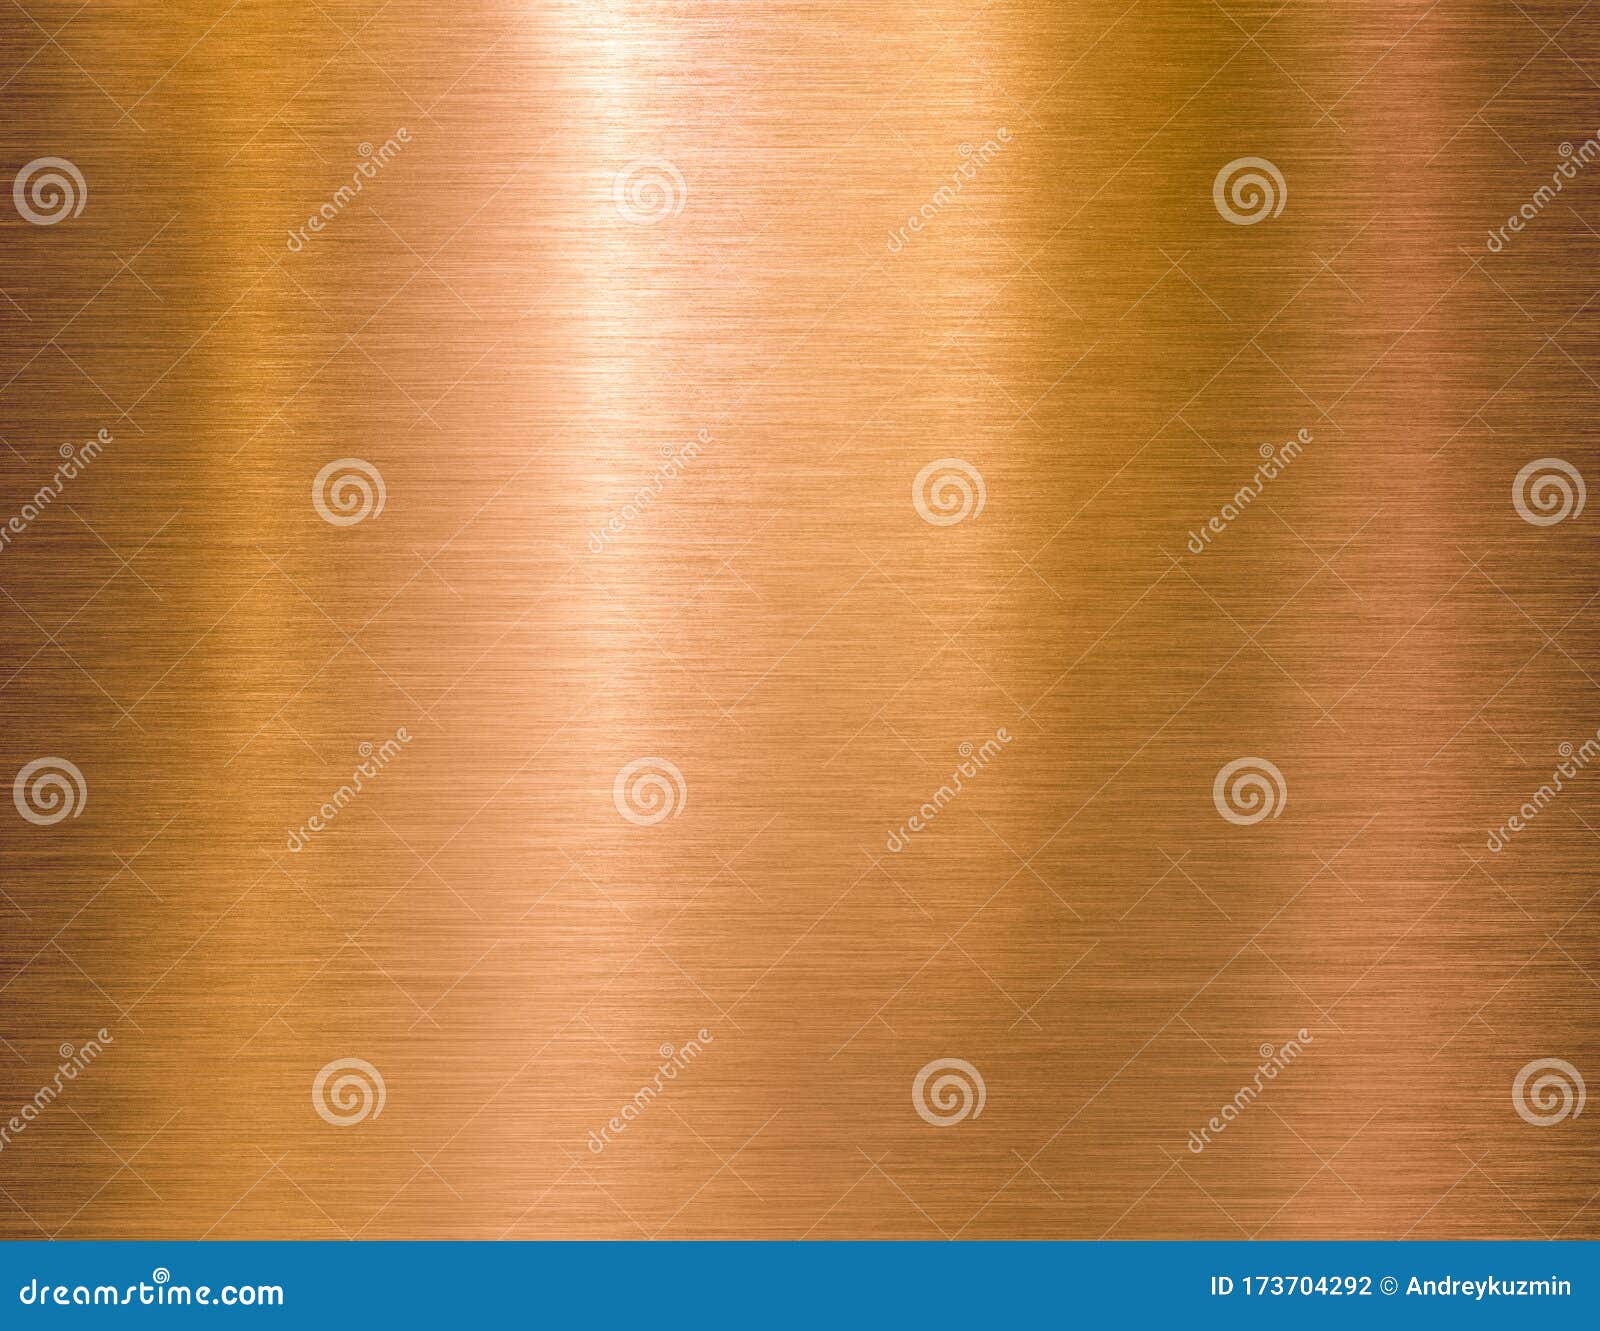 copper or bronze brushed metal background or texture